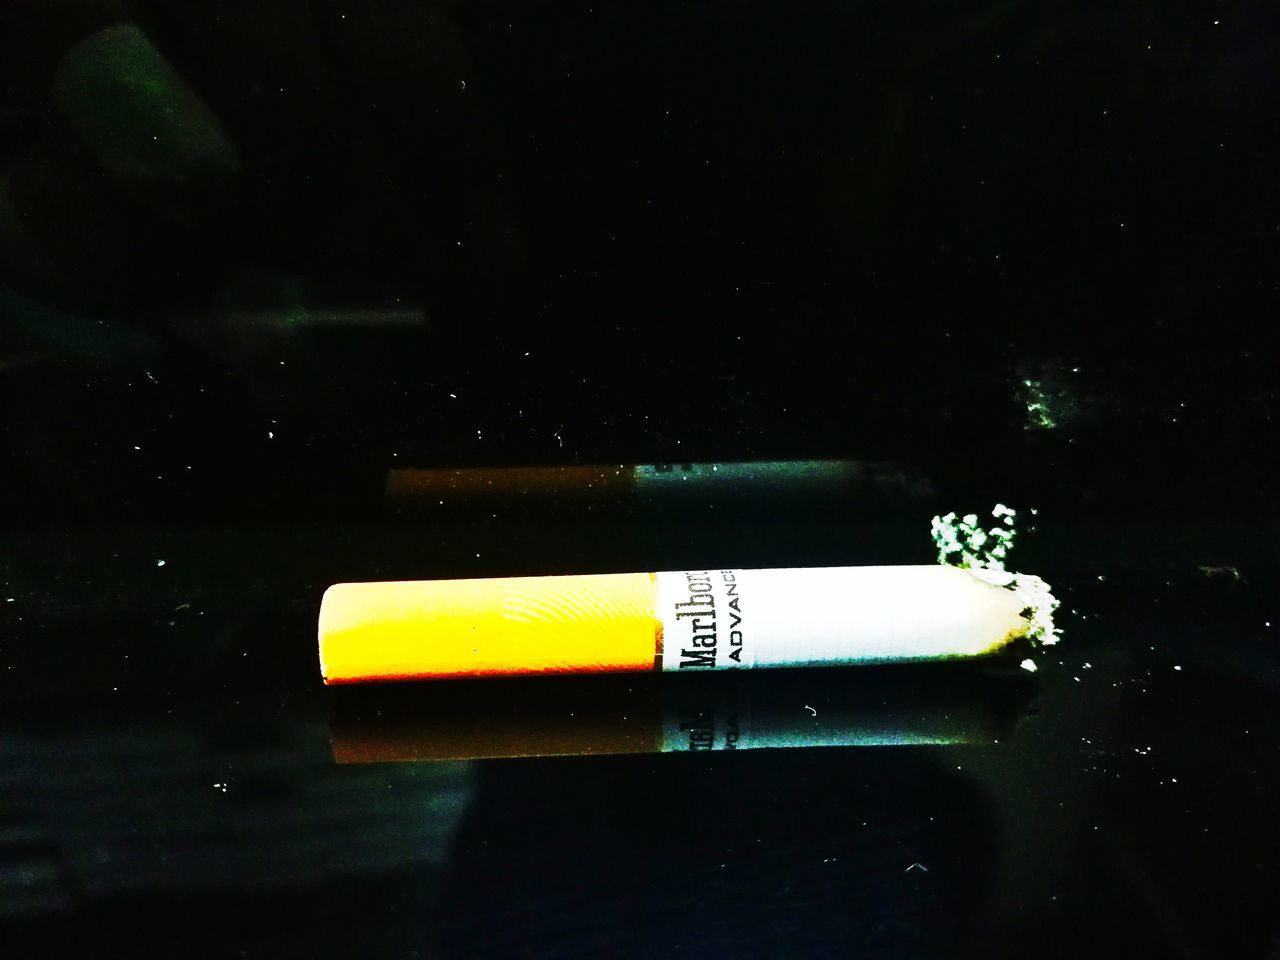 CLOSE-UP OF CIGARETTE SMOKING ON TABLE AGAINST BLACK BACKGROUND